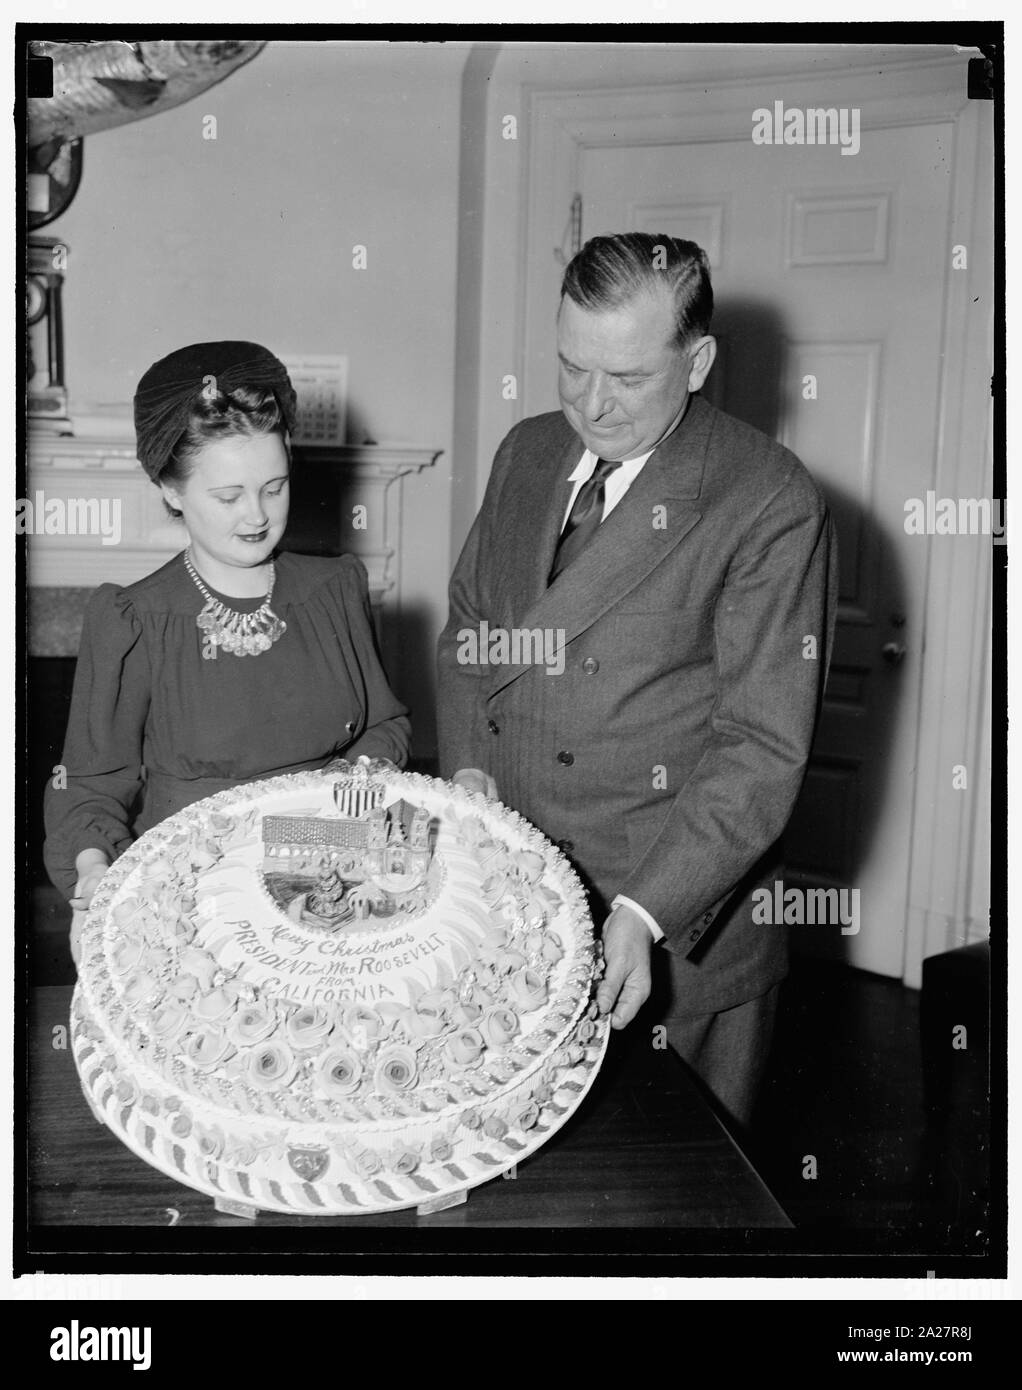 President gets Xmas fruit cake. Washington, D.C., Dec. 19. Brig. Gen. Edwin Watson, a Presidential Secretary, accepting for President Roosevelt a fruit cake from Miss Mildred Cook, Secretary to Rep. A.J. Elliott of California. The cake is a gift from W.C. Baker of Ojai, Calif., who has baked cakes for the White House for the last 17 years Stock Photo